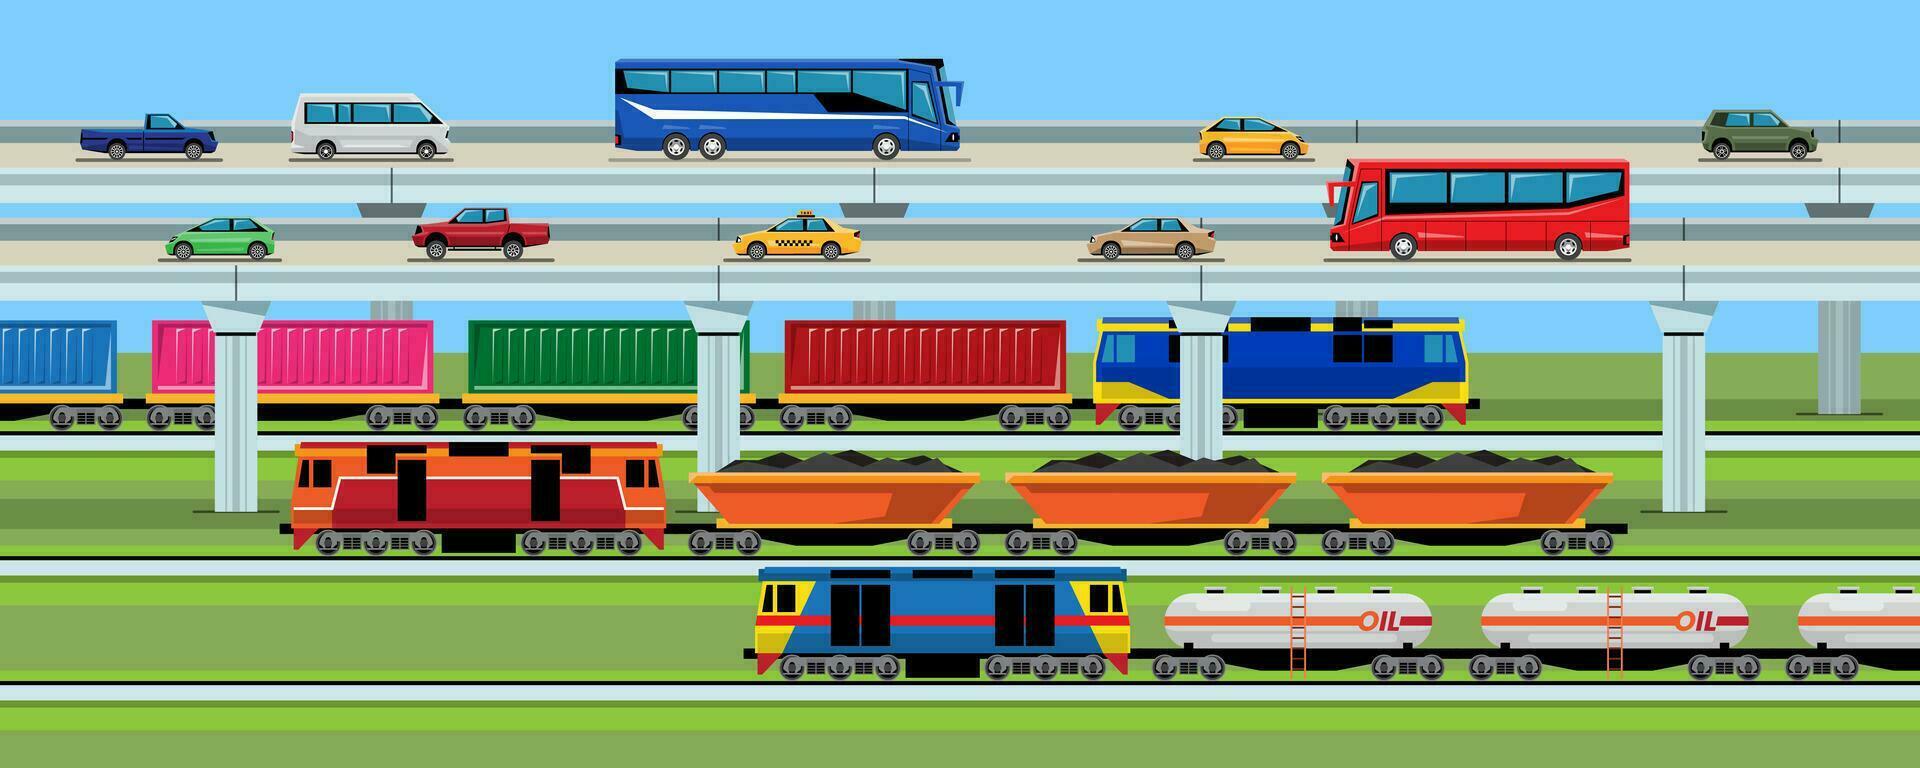 Transport Vehicle In The City, Car Bus Van Truck and Train. vector